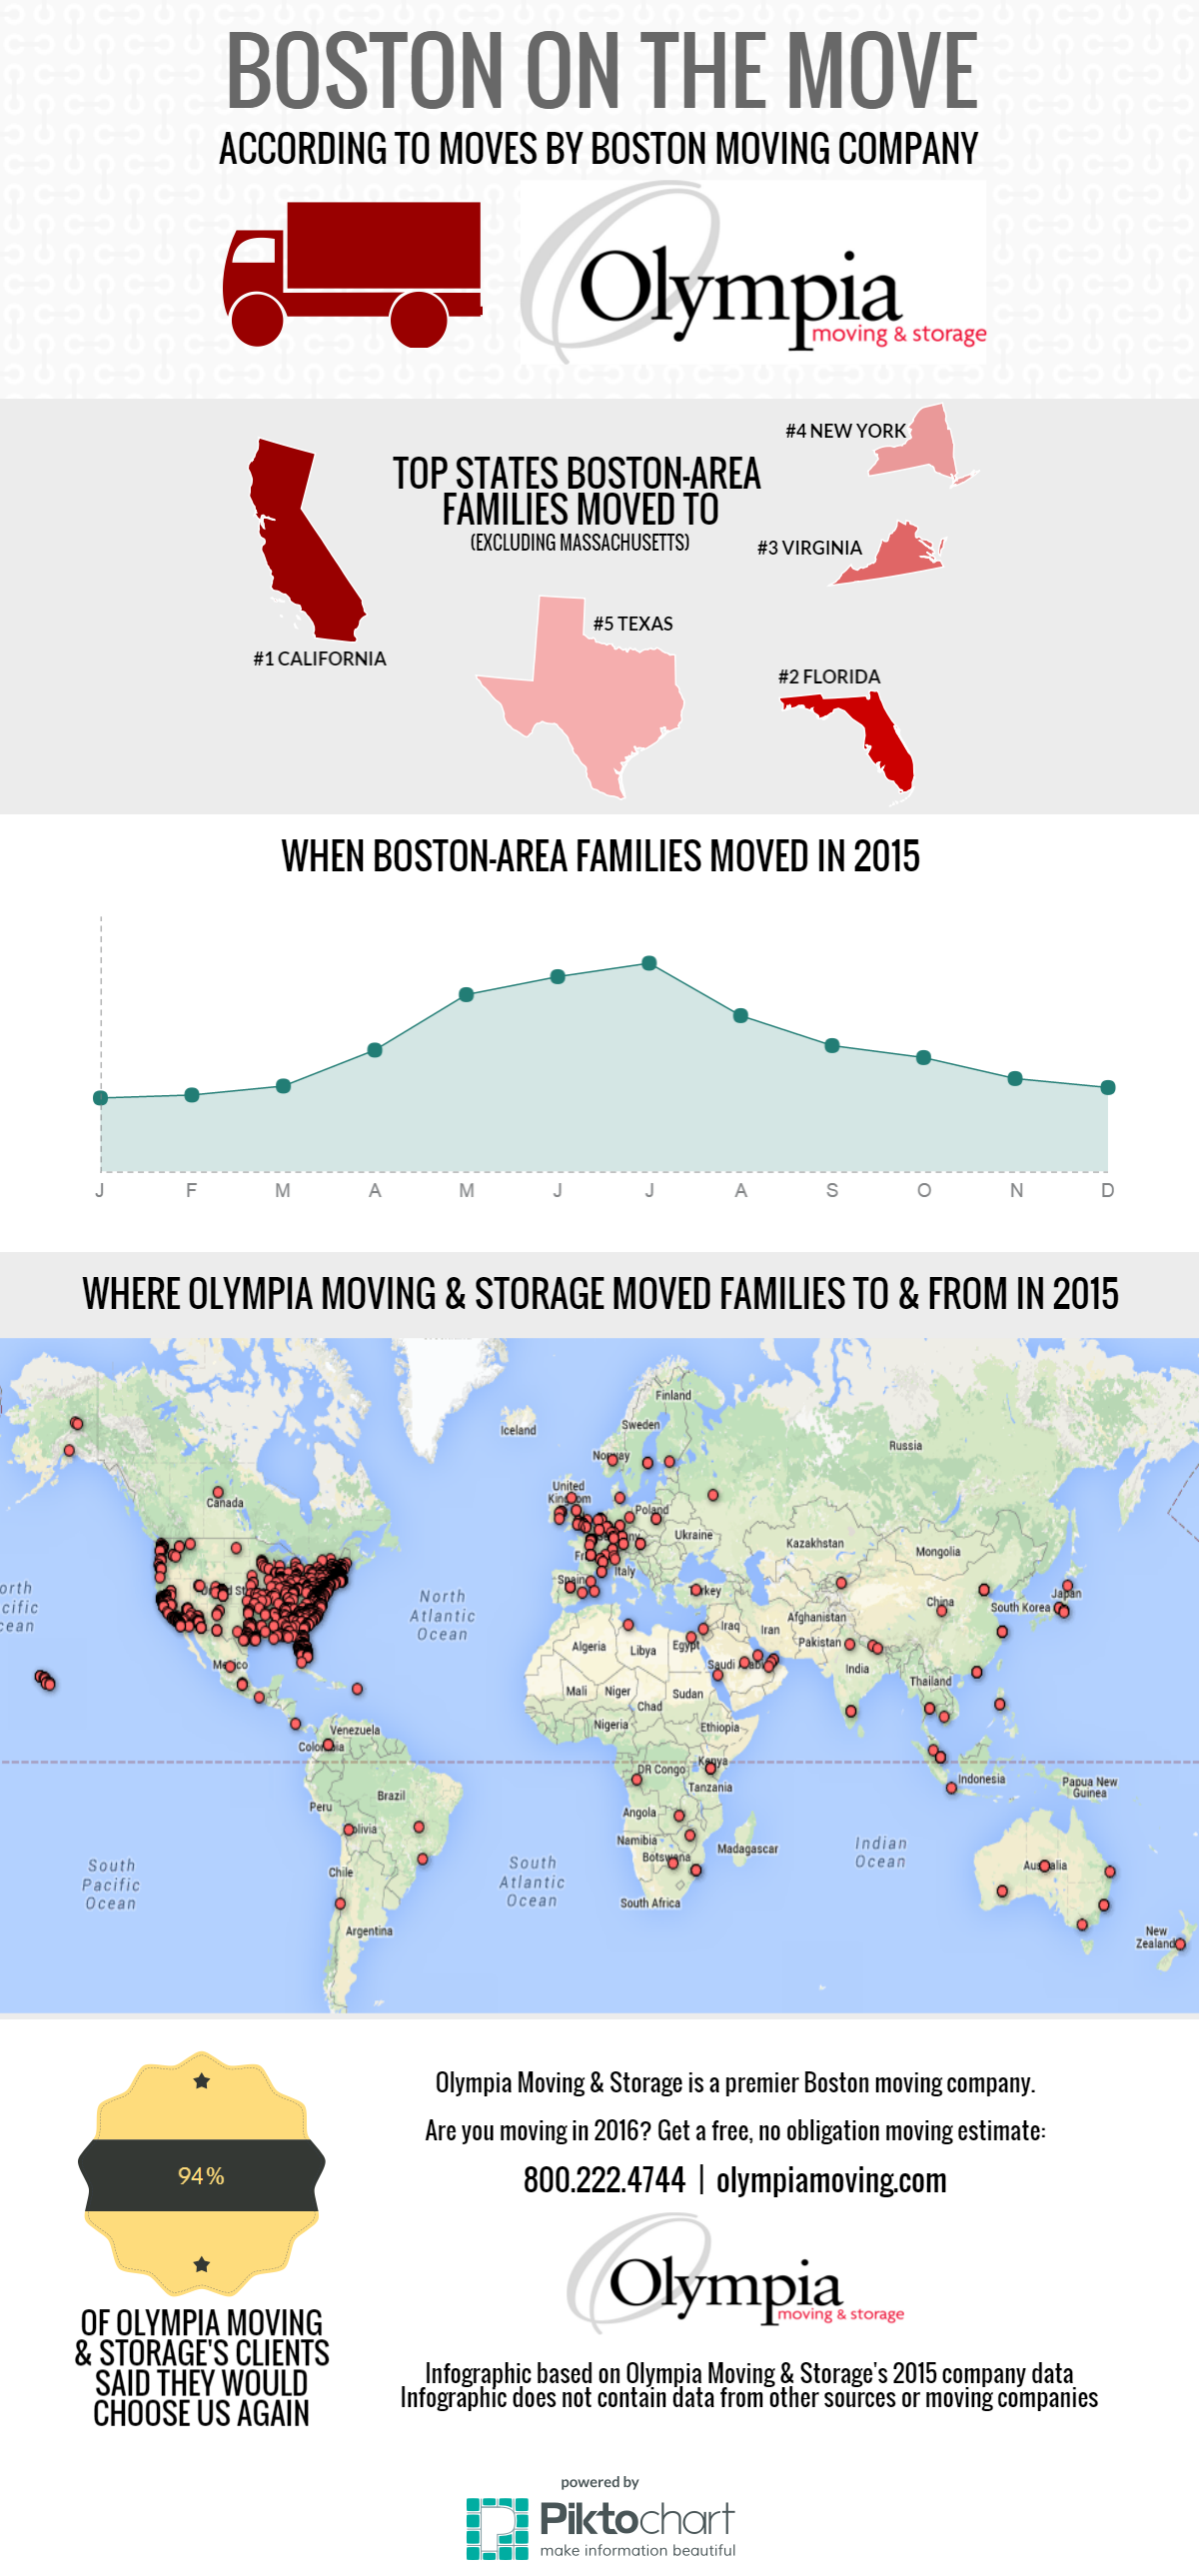 Boston on the Move 2015 Trends by Olympia Moving & Storage